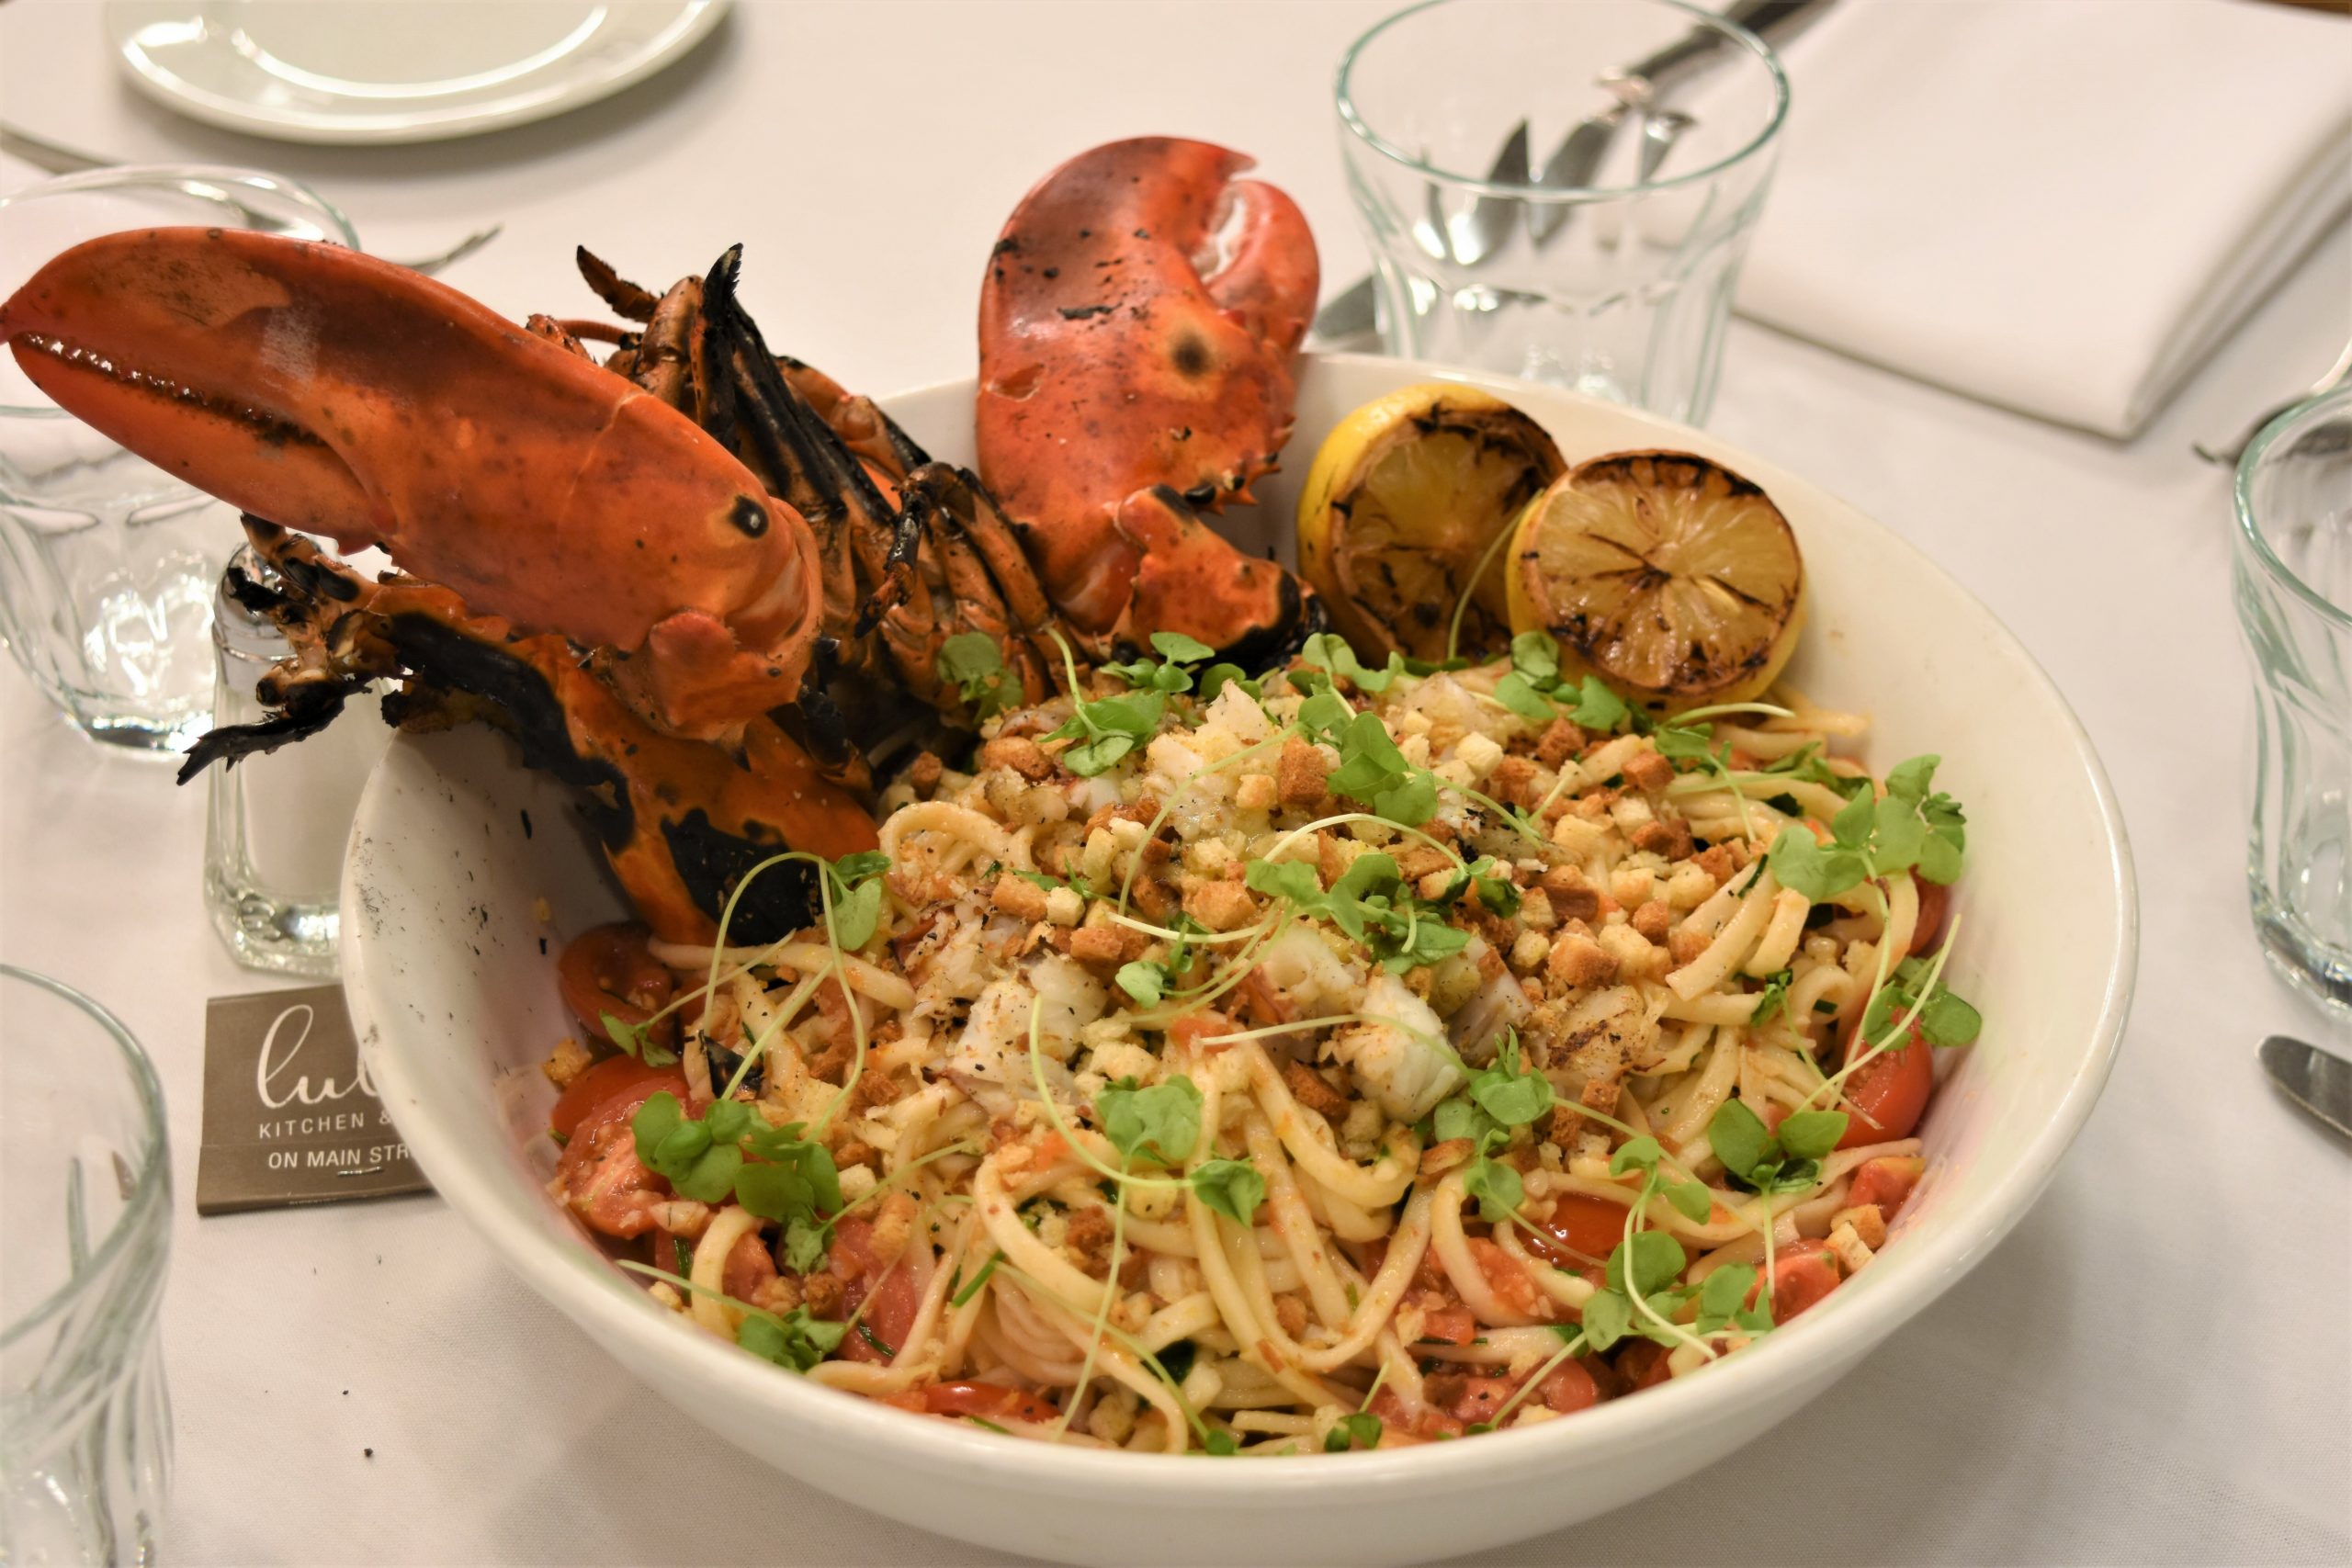 Lulu Kitchen & Bar's lobster pasta for two.